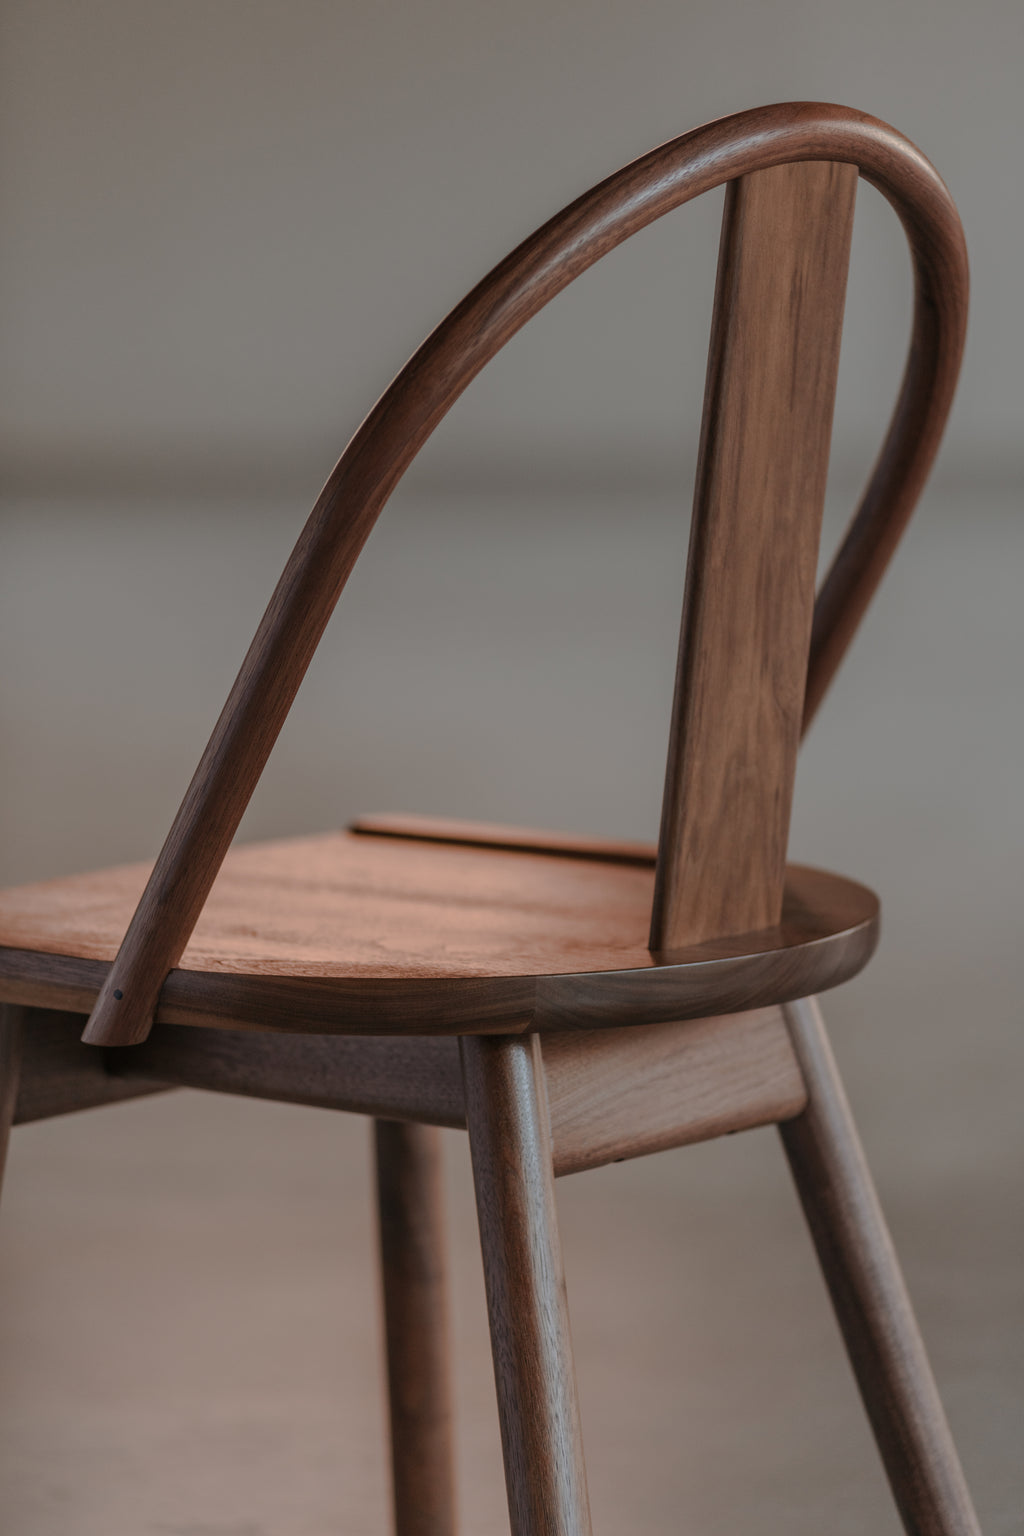 Beautiful light reflecting off the modern walnut Atlas Chair, from Chilton Furniture in Maine